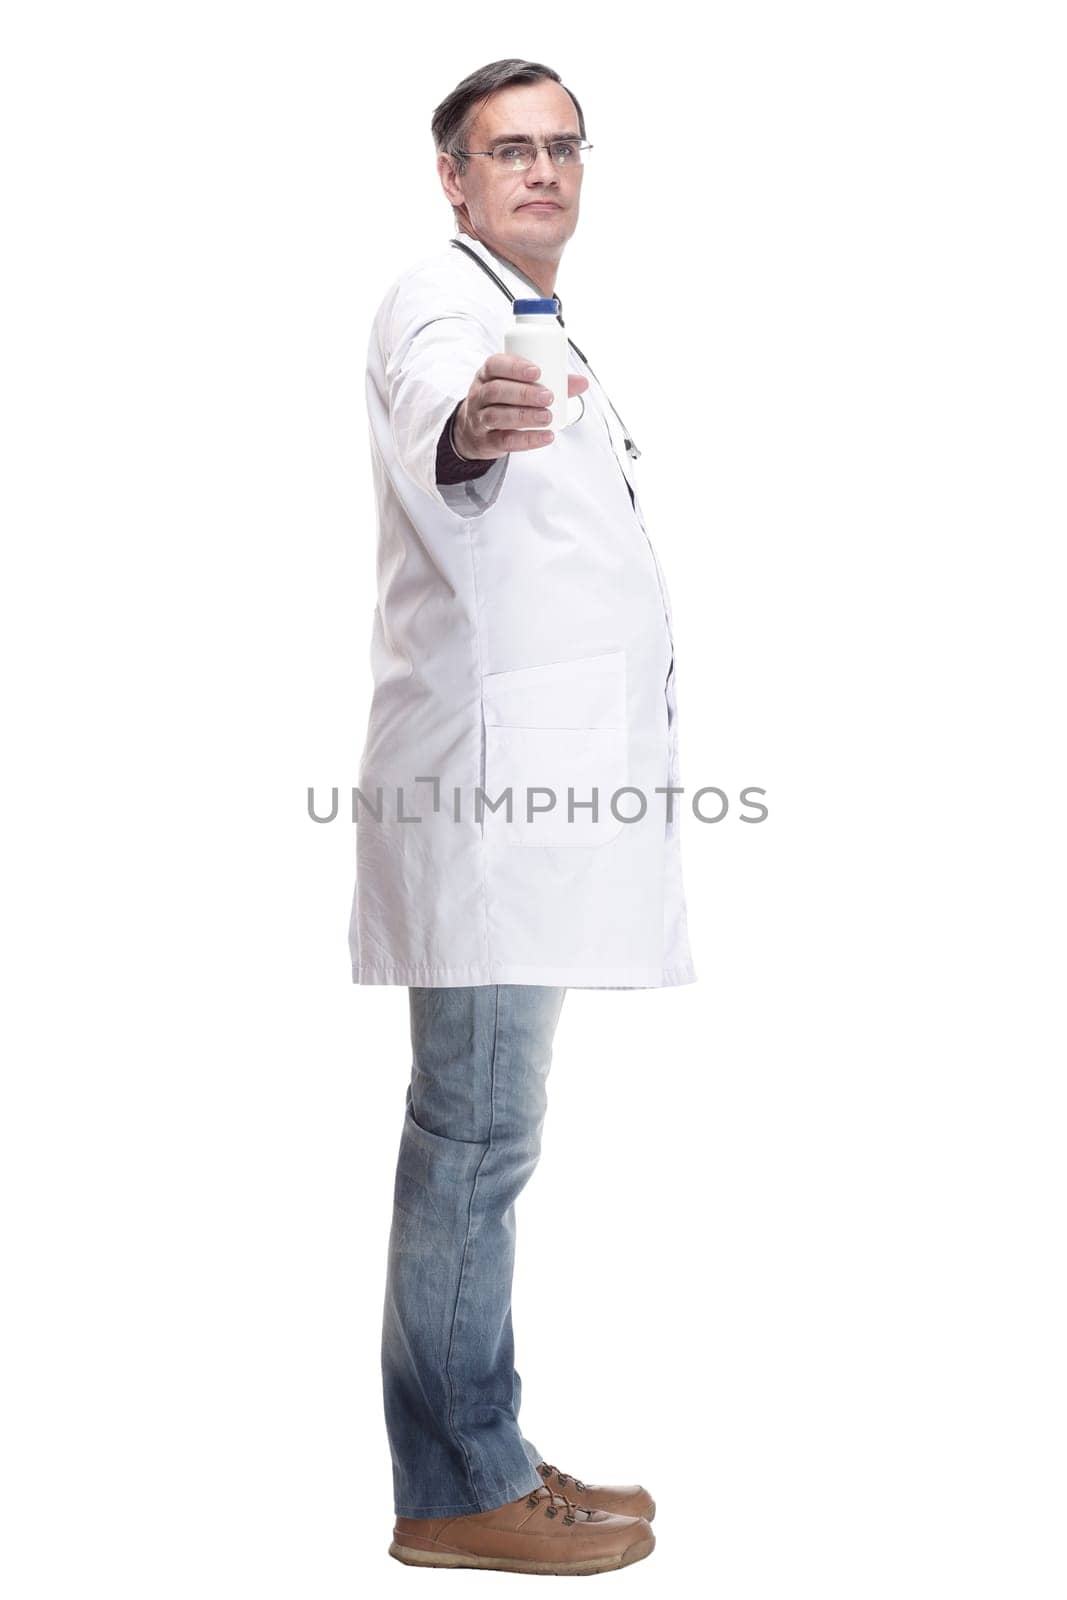 in full growth.qualified doctor with sanitizer in hand. isolated on a white background.